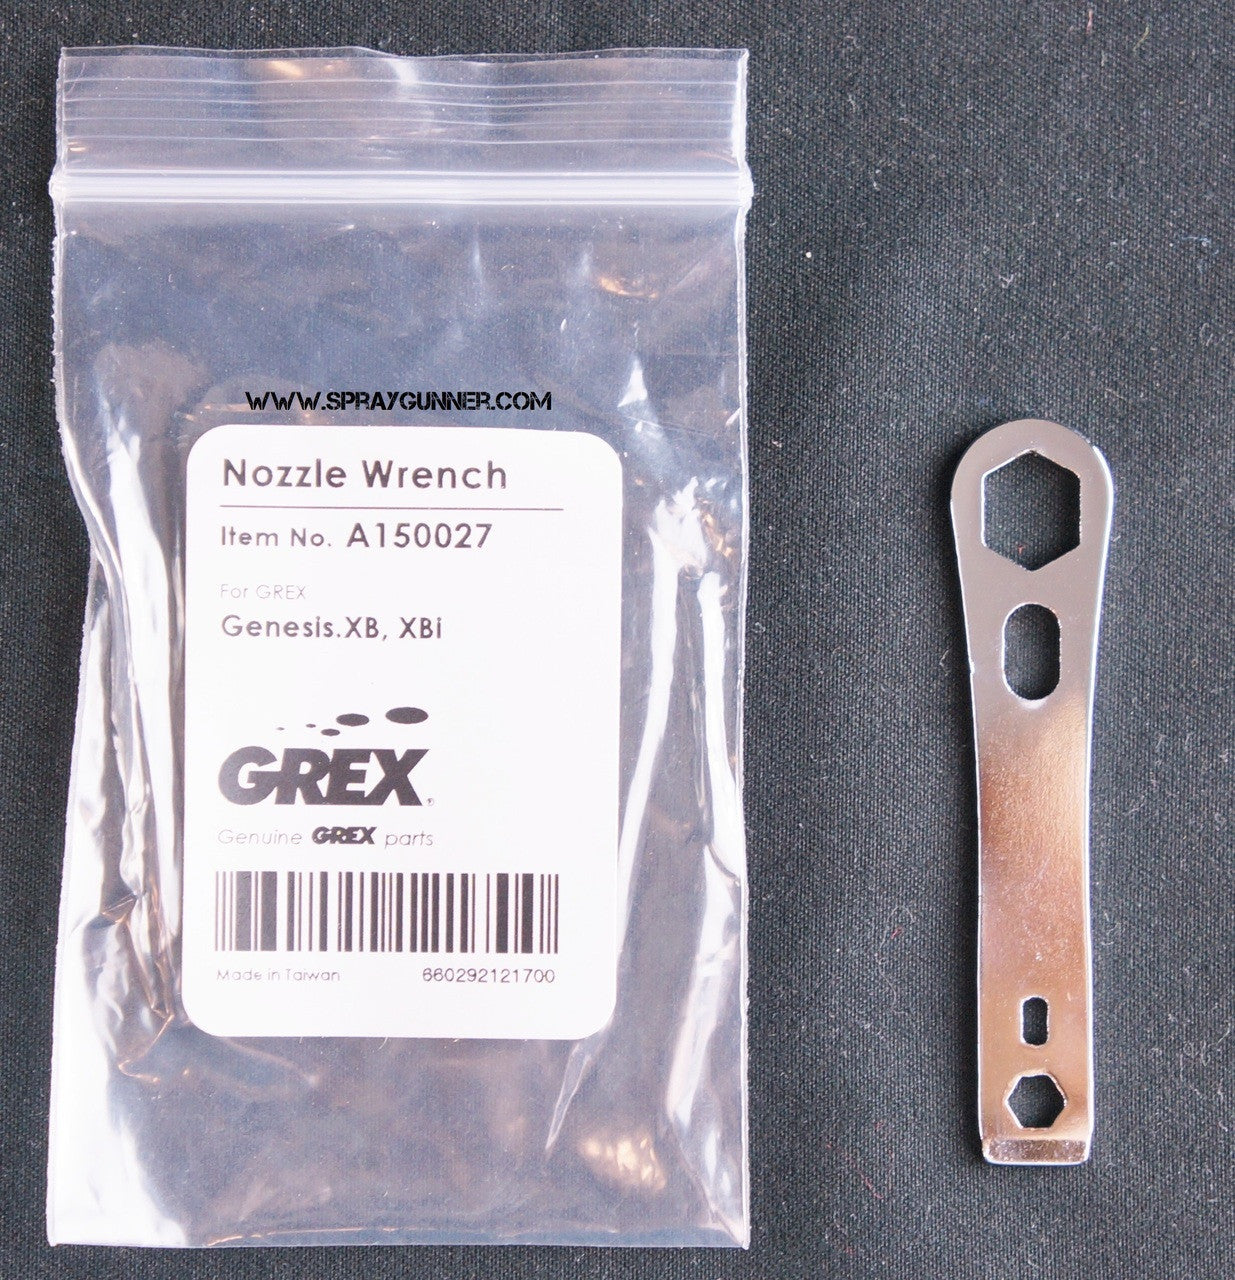 Grex Nozzle Wrench A150027 A150027 Grex Airbrush